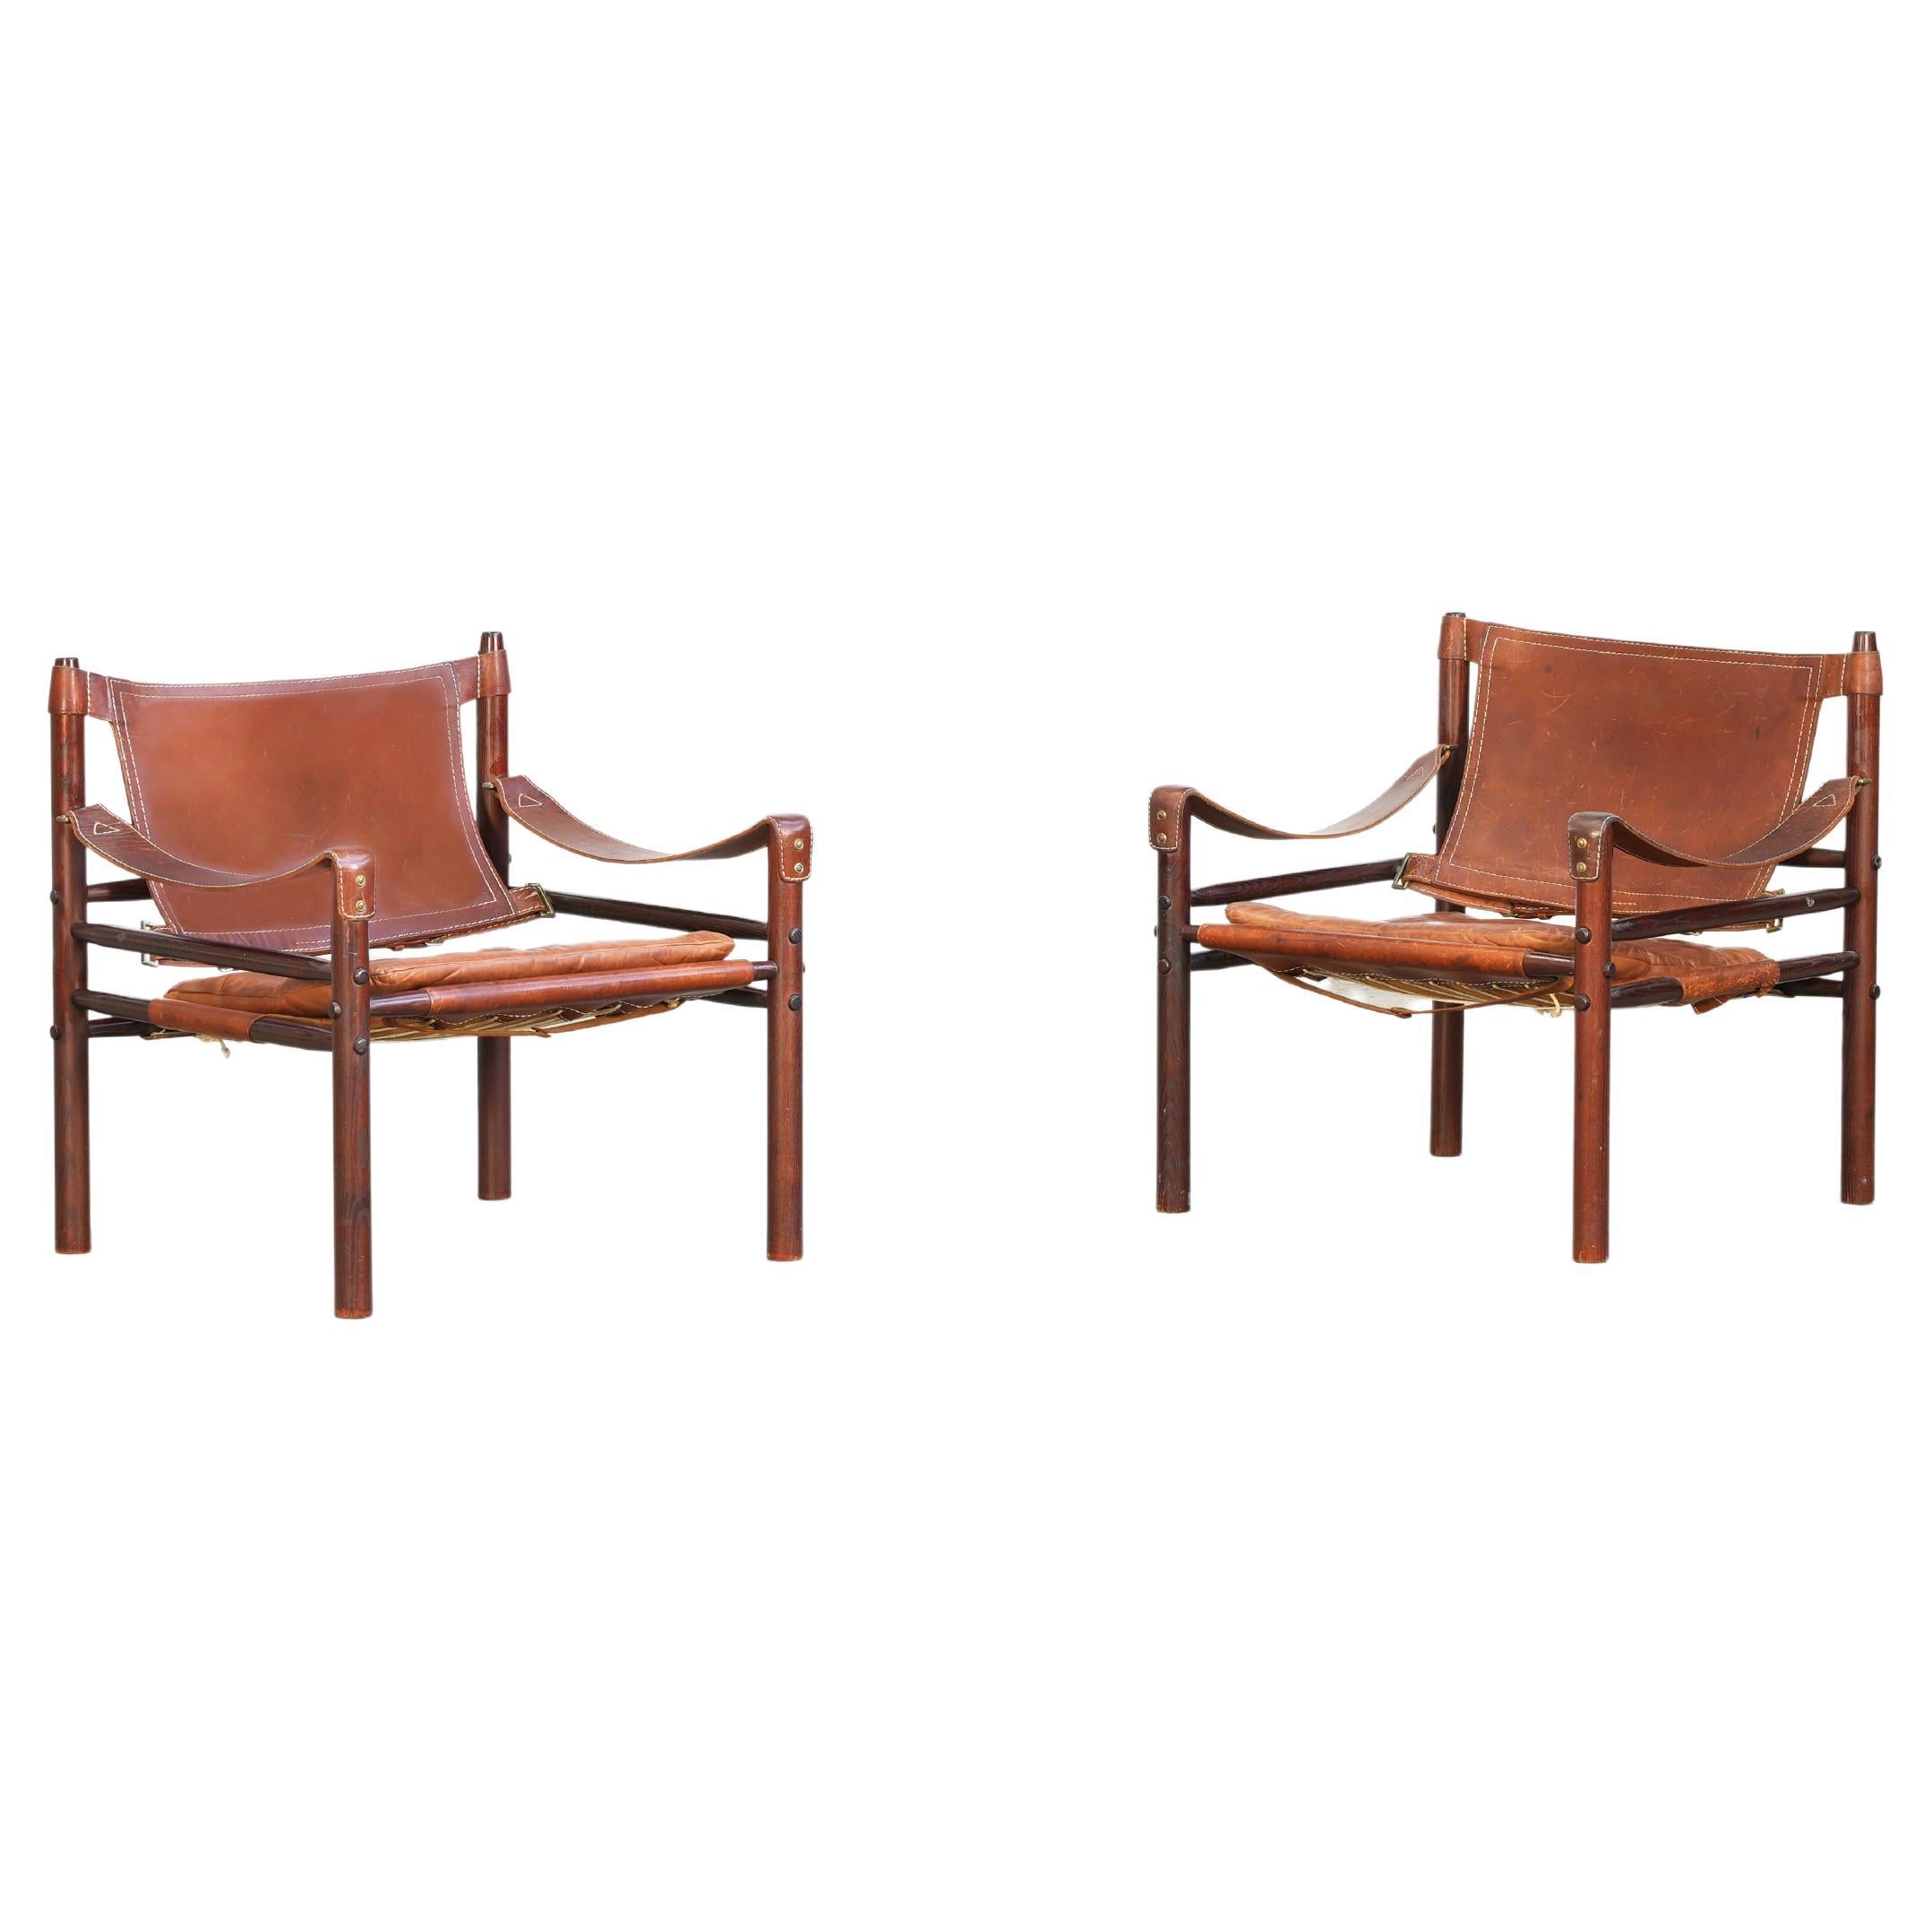 Pair of Safari Sirocco Chairs brown leather by Arne Norell for Norell AB, Sweden